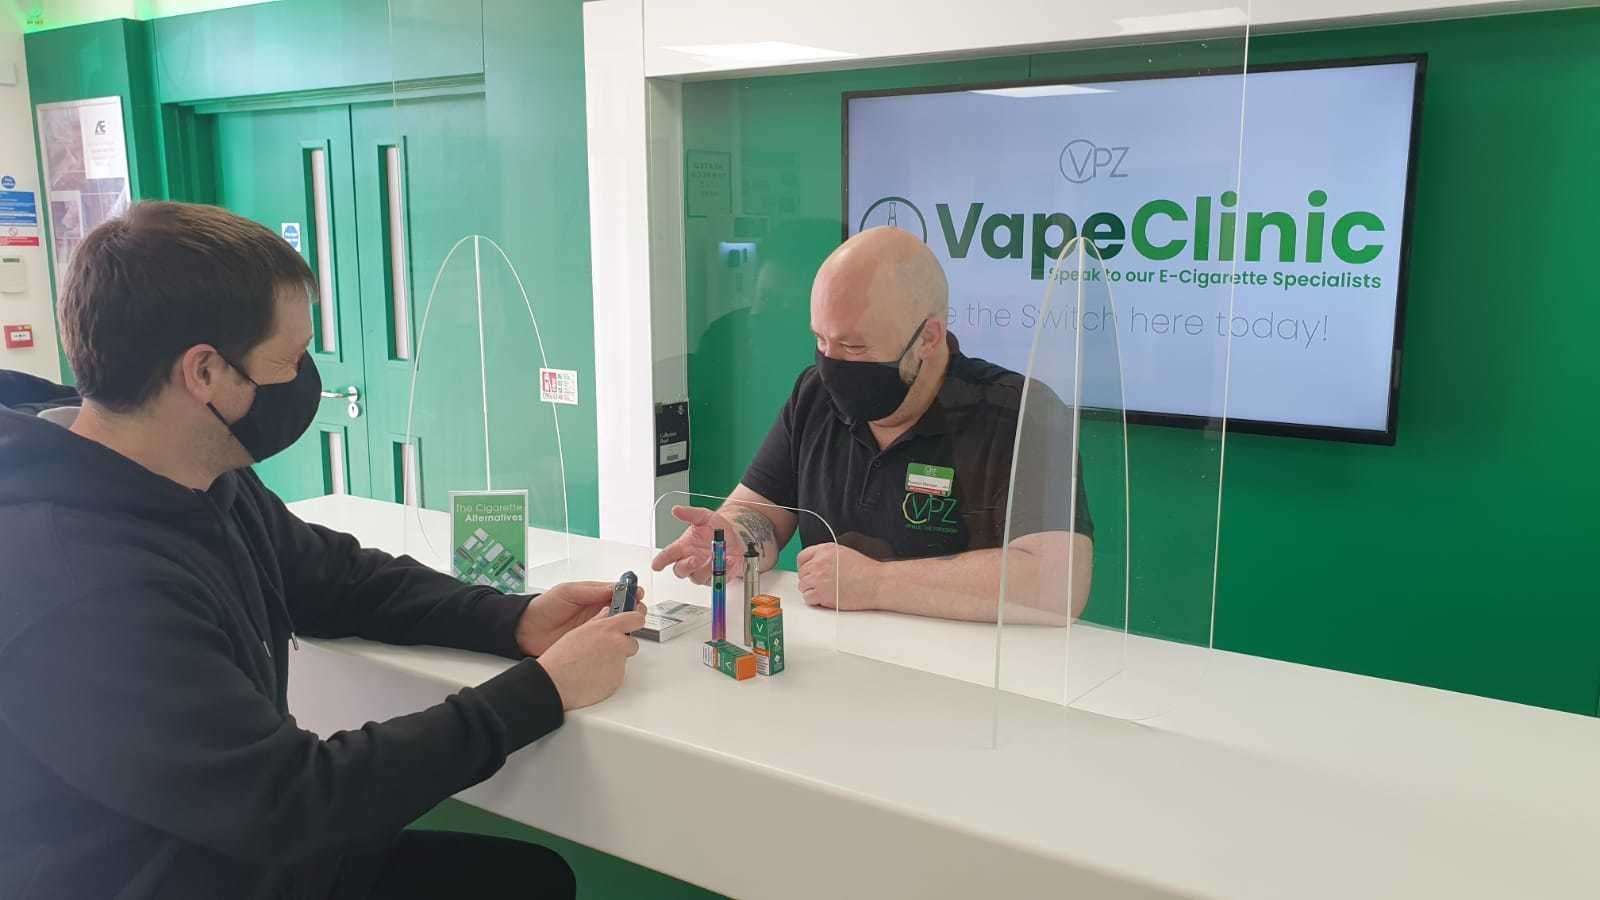 VPZ is launching vape clinics across the UK during Stoptober.